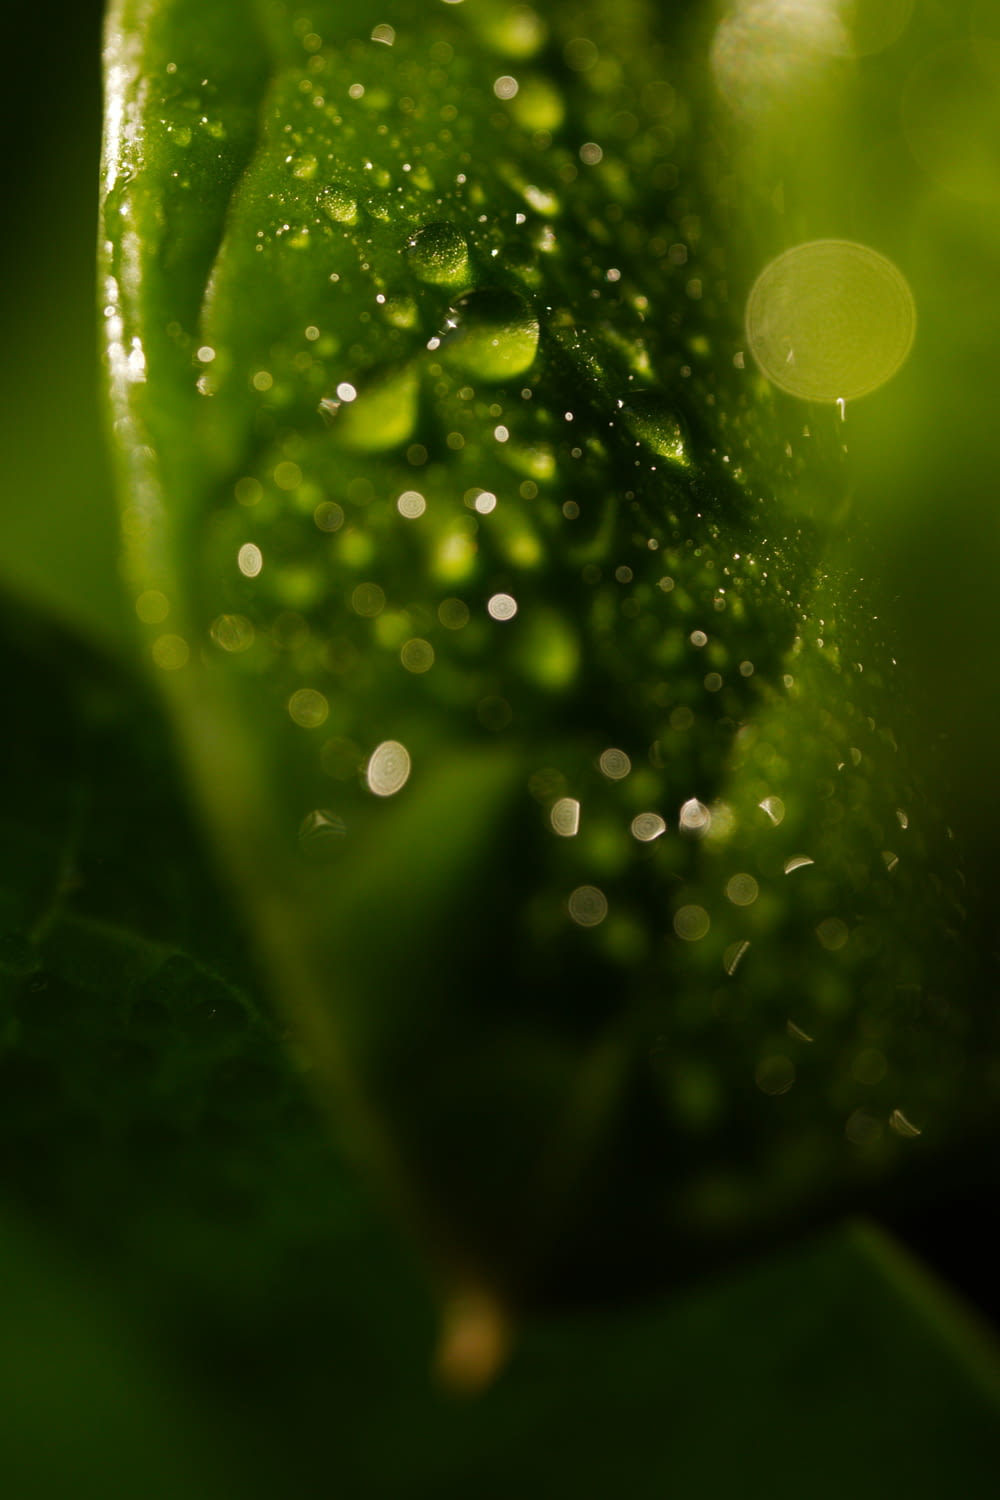 a close up of a green leaf with water droplets